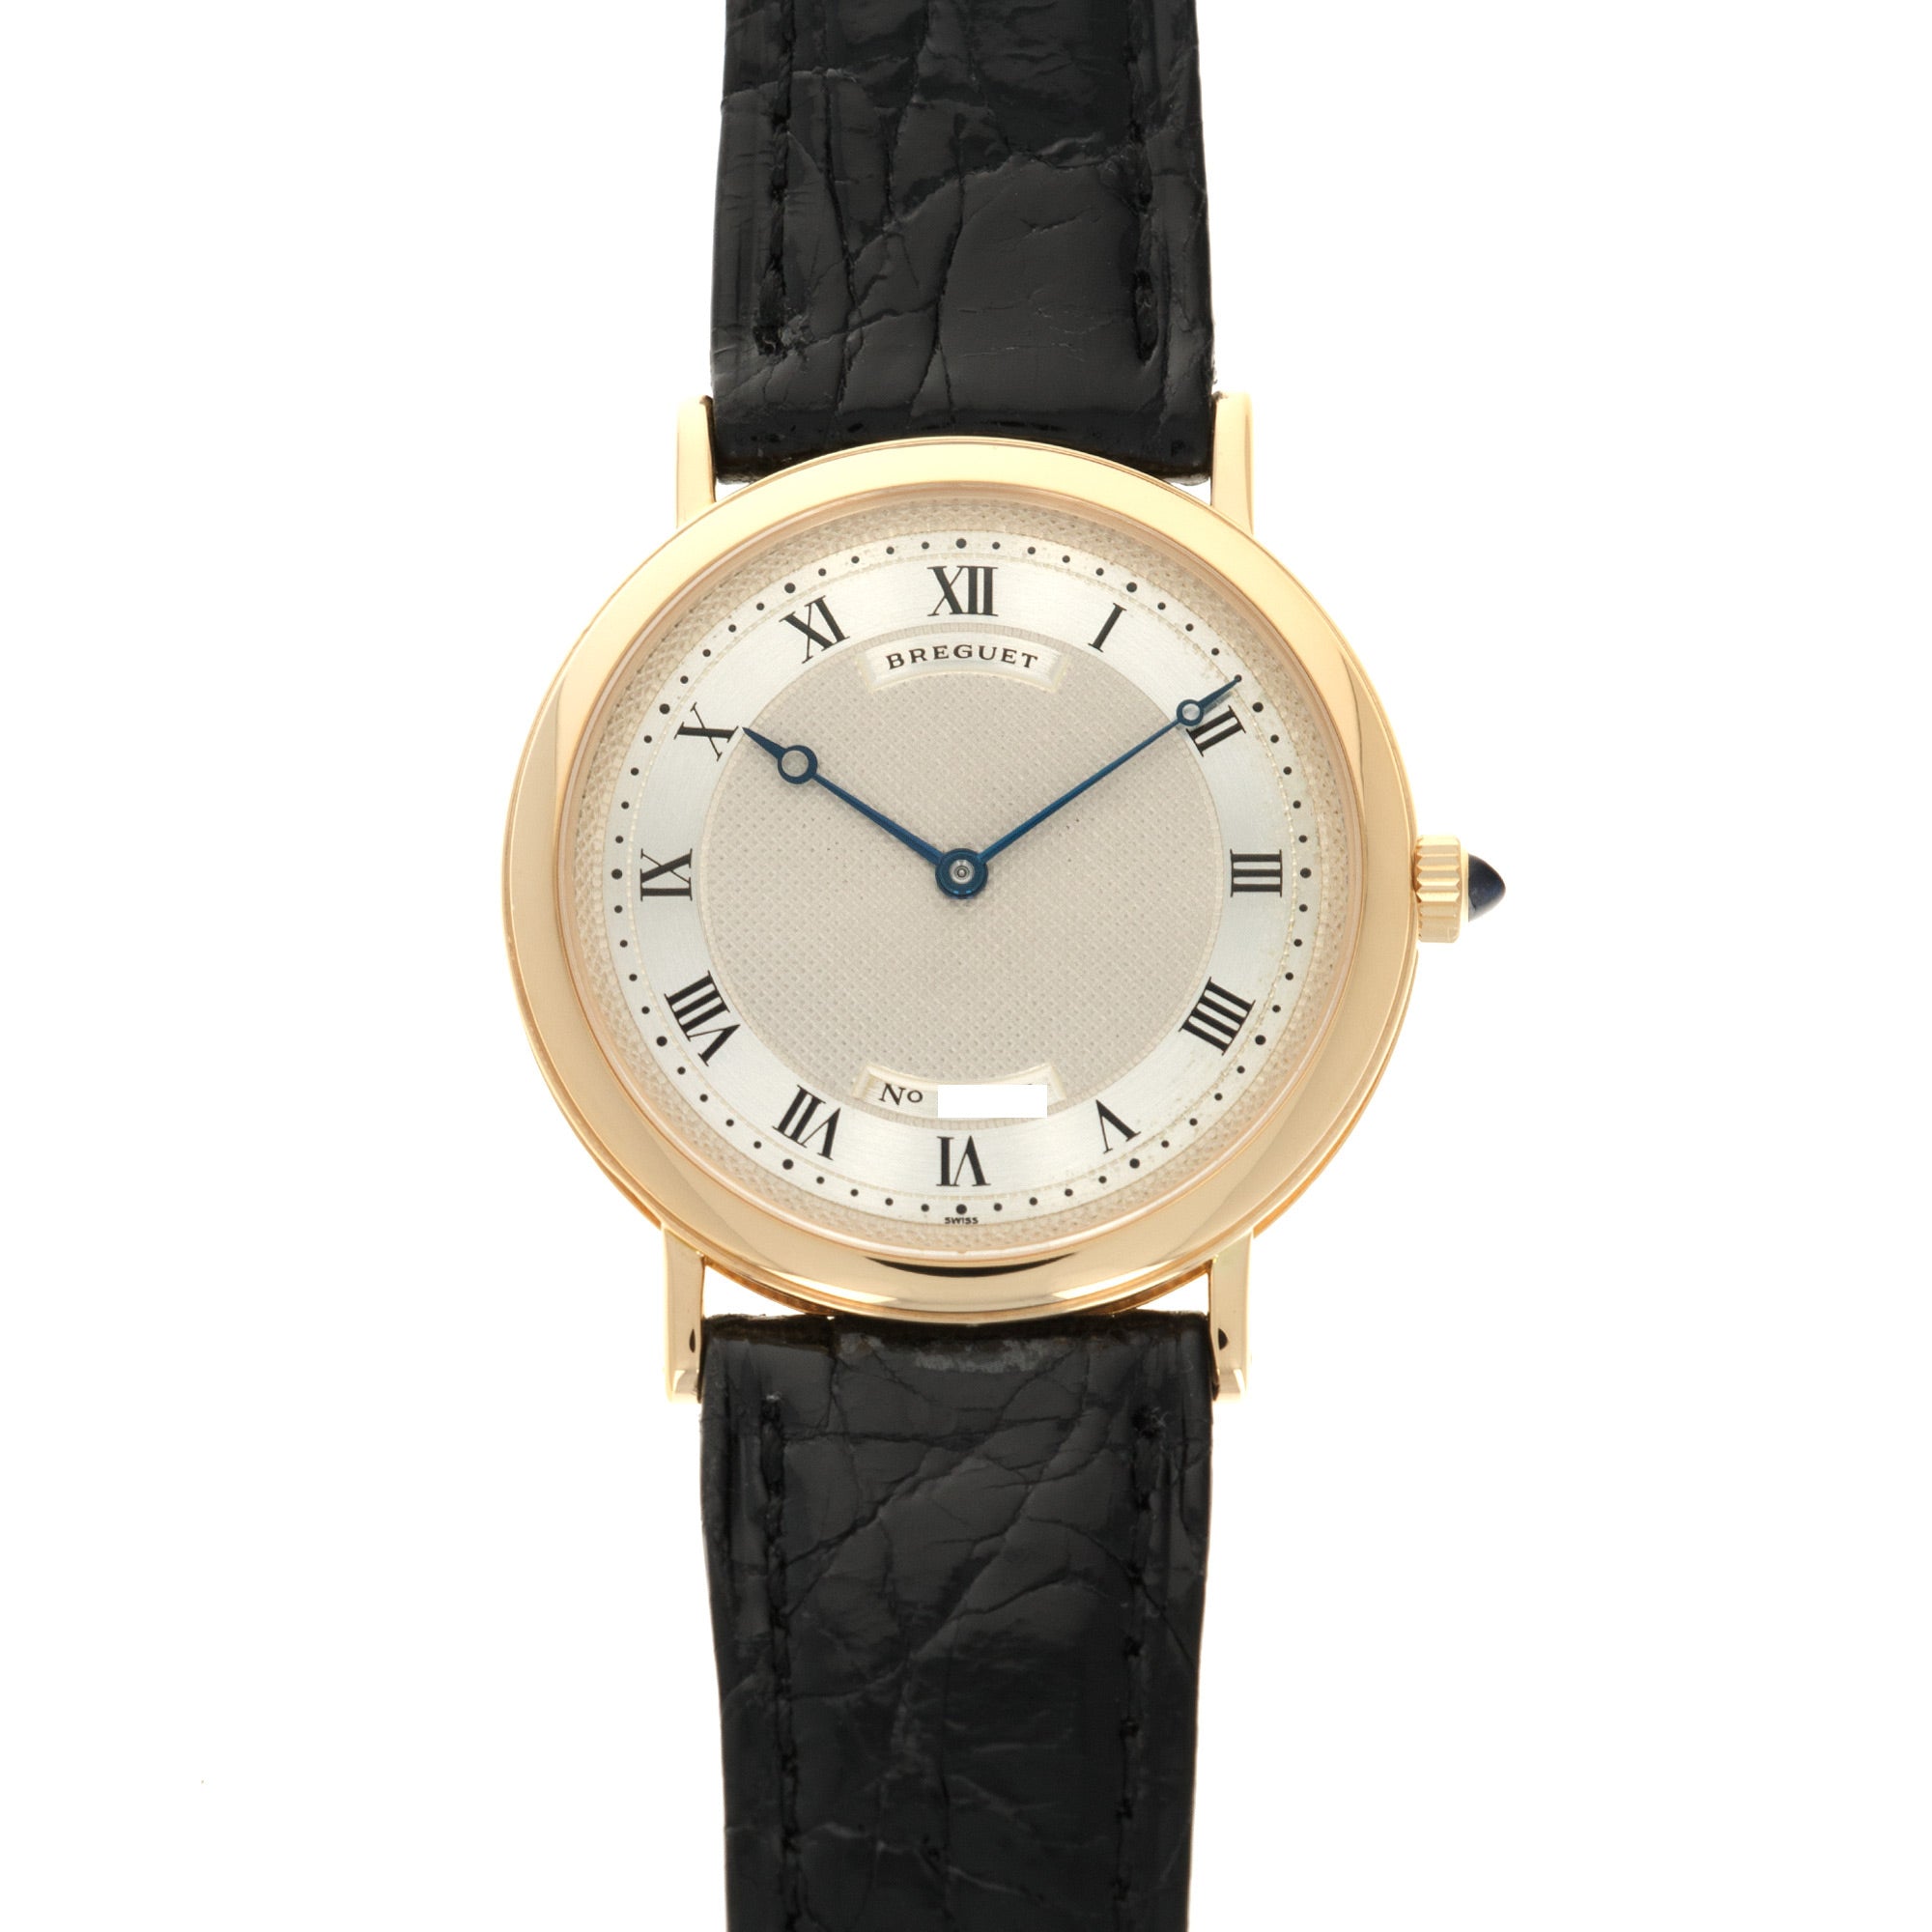 Breguet - Breguet Yellow Gold Classique Watch, Retailed by Chaumet Paris - The Keystone Watches